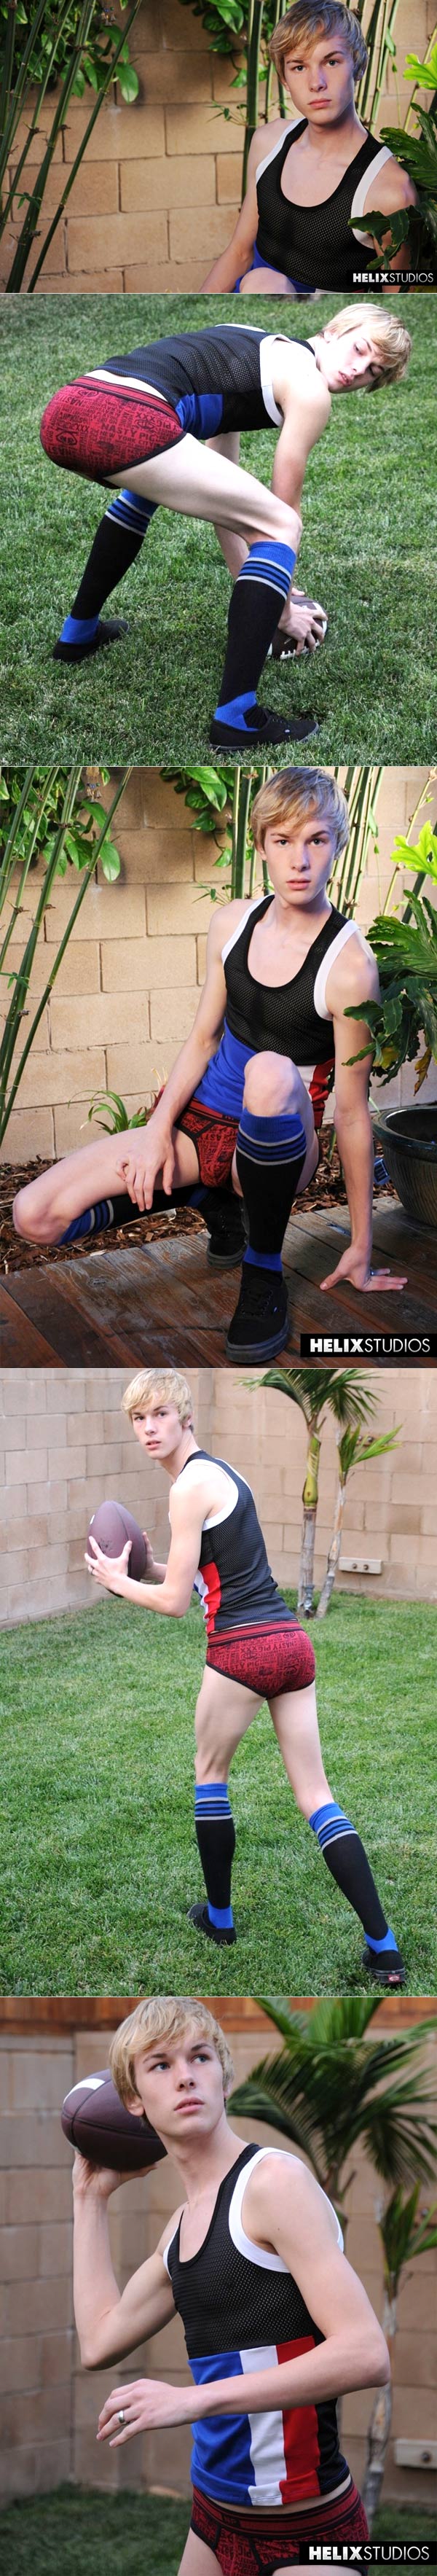 Scotty's First Time (Anderson Lovell & Scotty Clarke) at HelixStudios